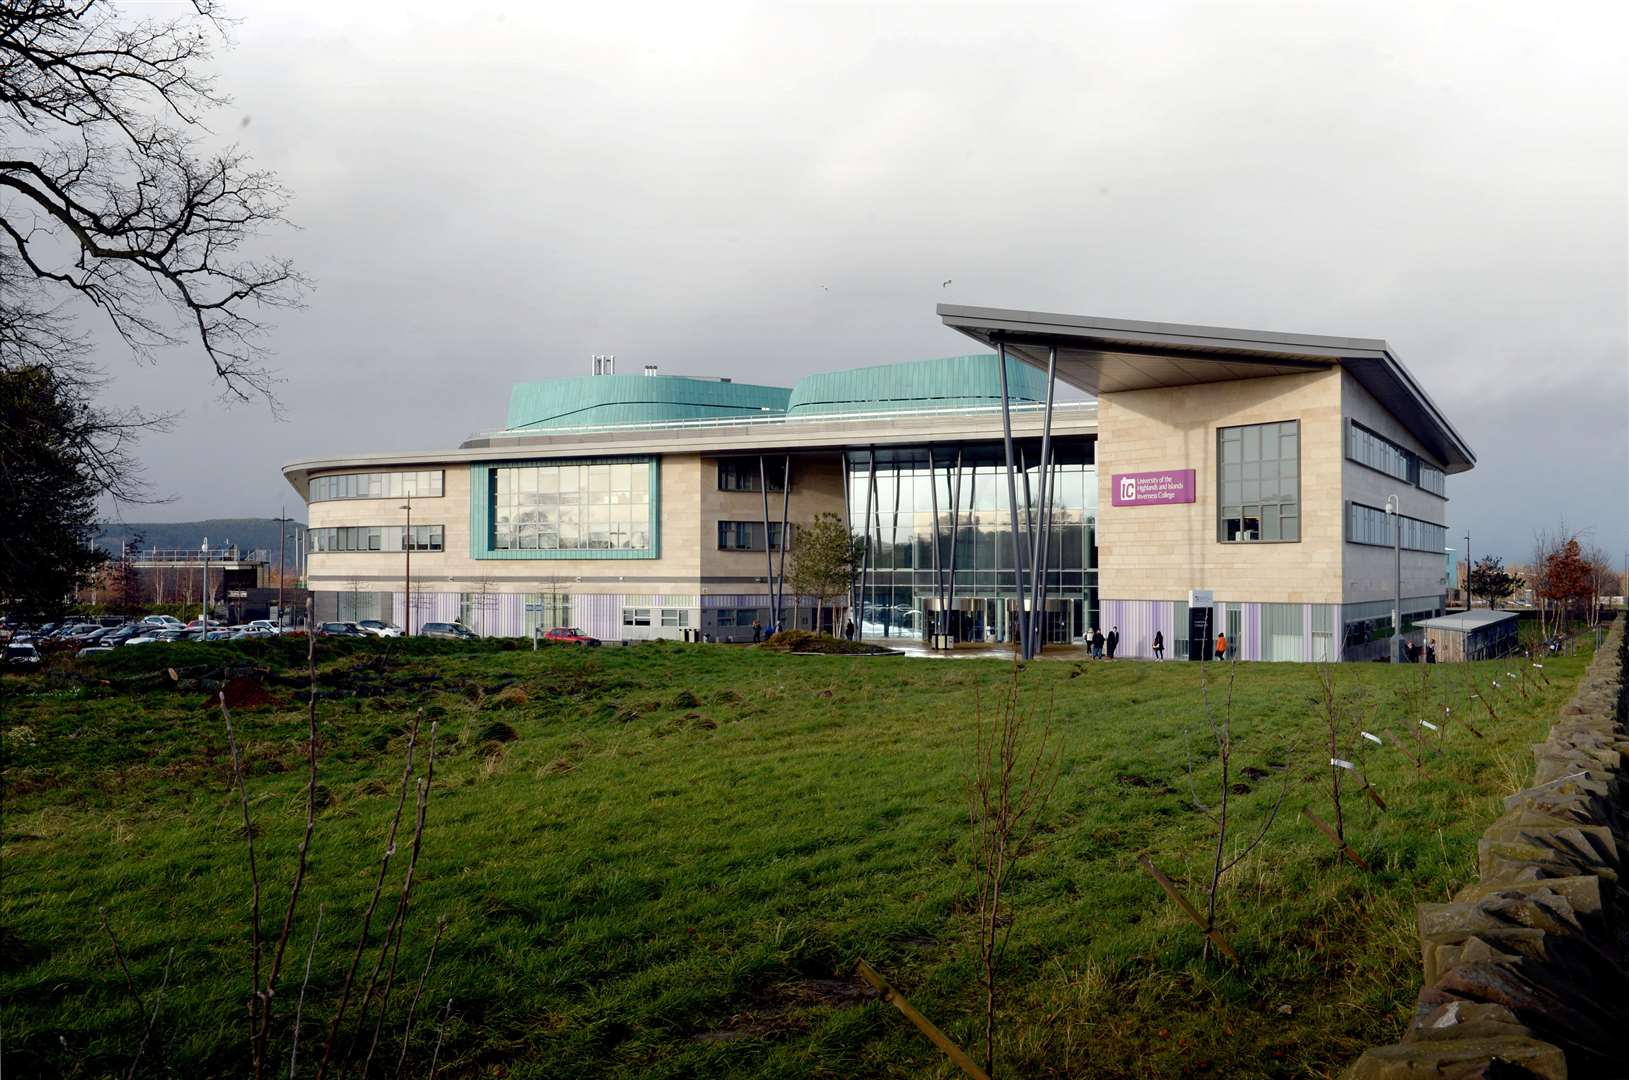 All UHI campuses, including Inverness College, are to suspend face-to-face teaching.